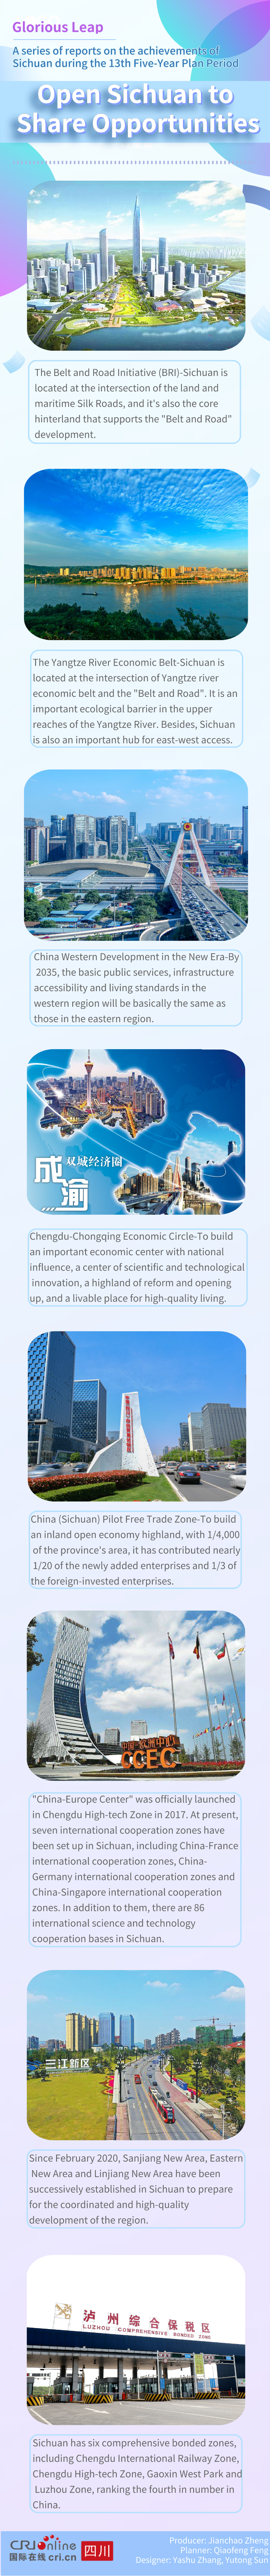 Glorious Leap-A Series of Reports on the Achievements of Sichuan During the 13th Five-Year Plan Period: Policy